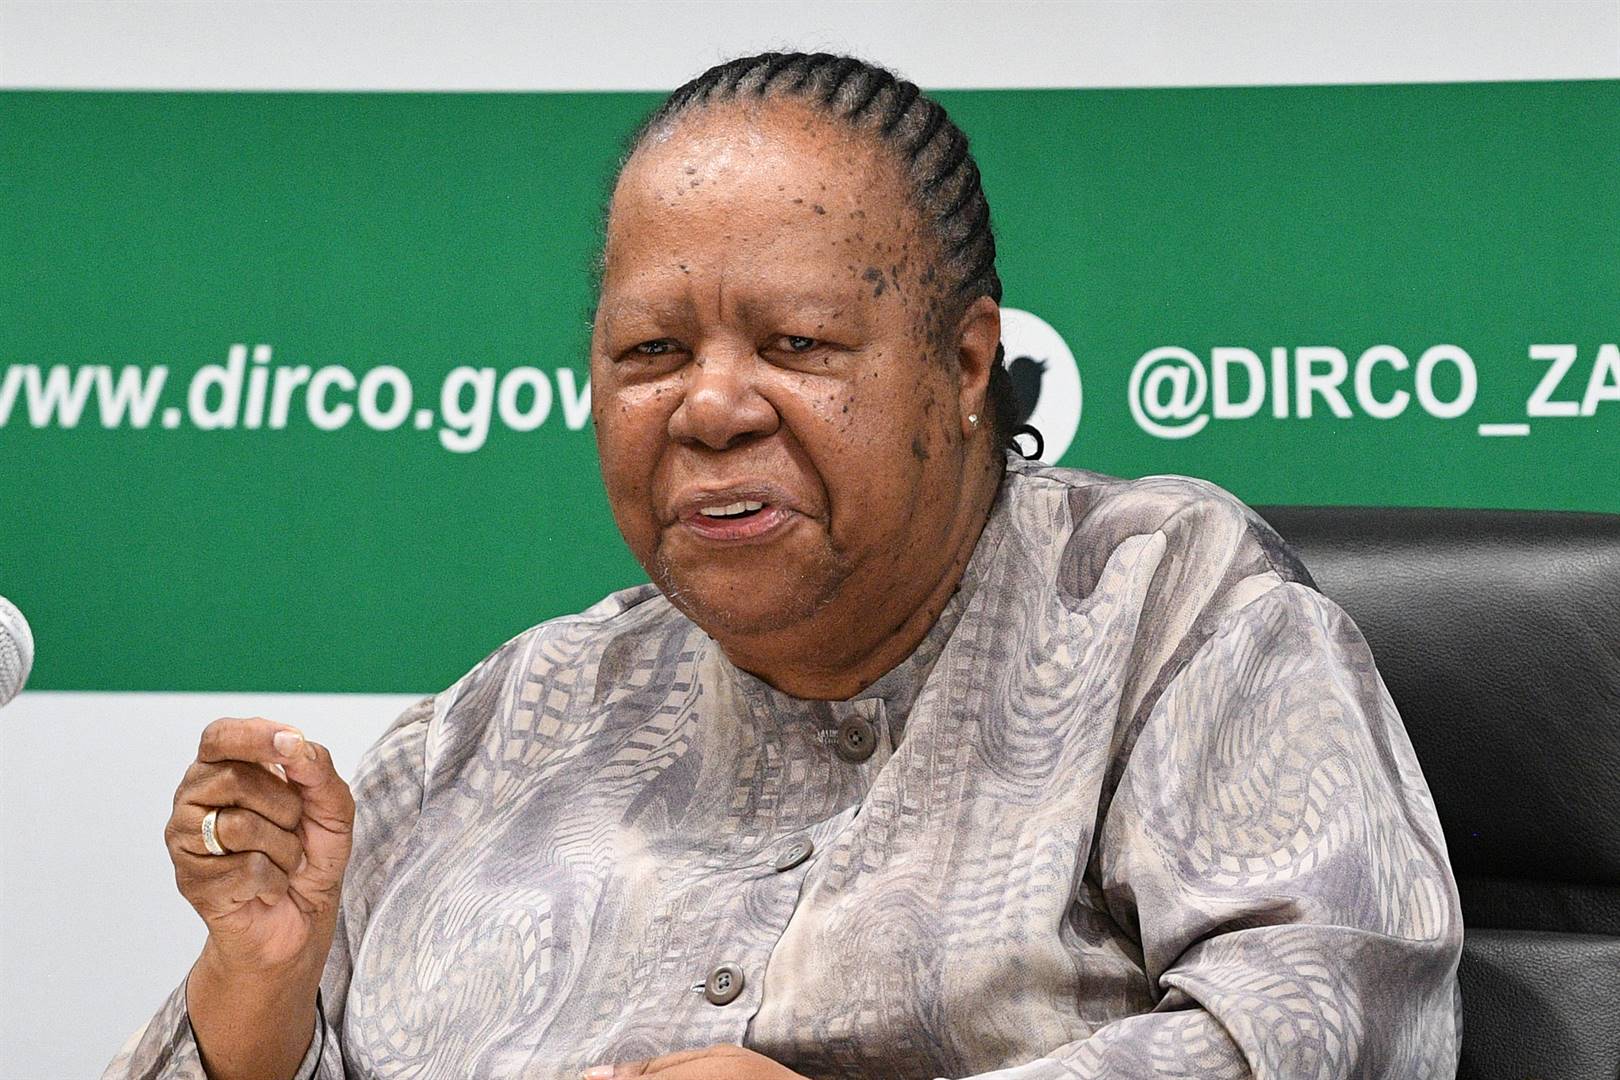 International Relations minister Naledi Pandor's name is among those being punted for the ANC's premier candidate in the Western Cape. (Lefty Shivambu / Gallo Images)